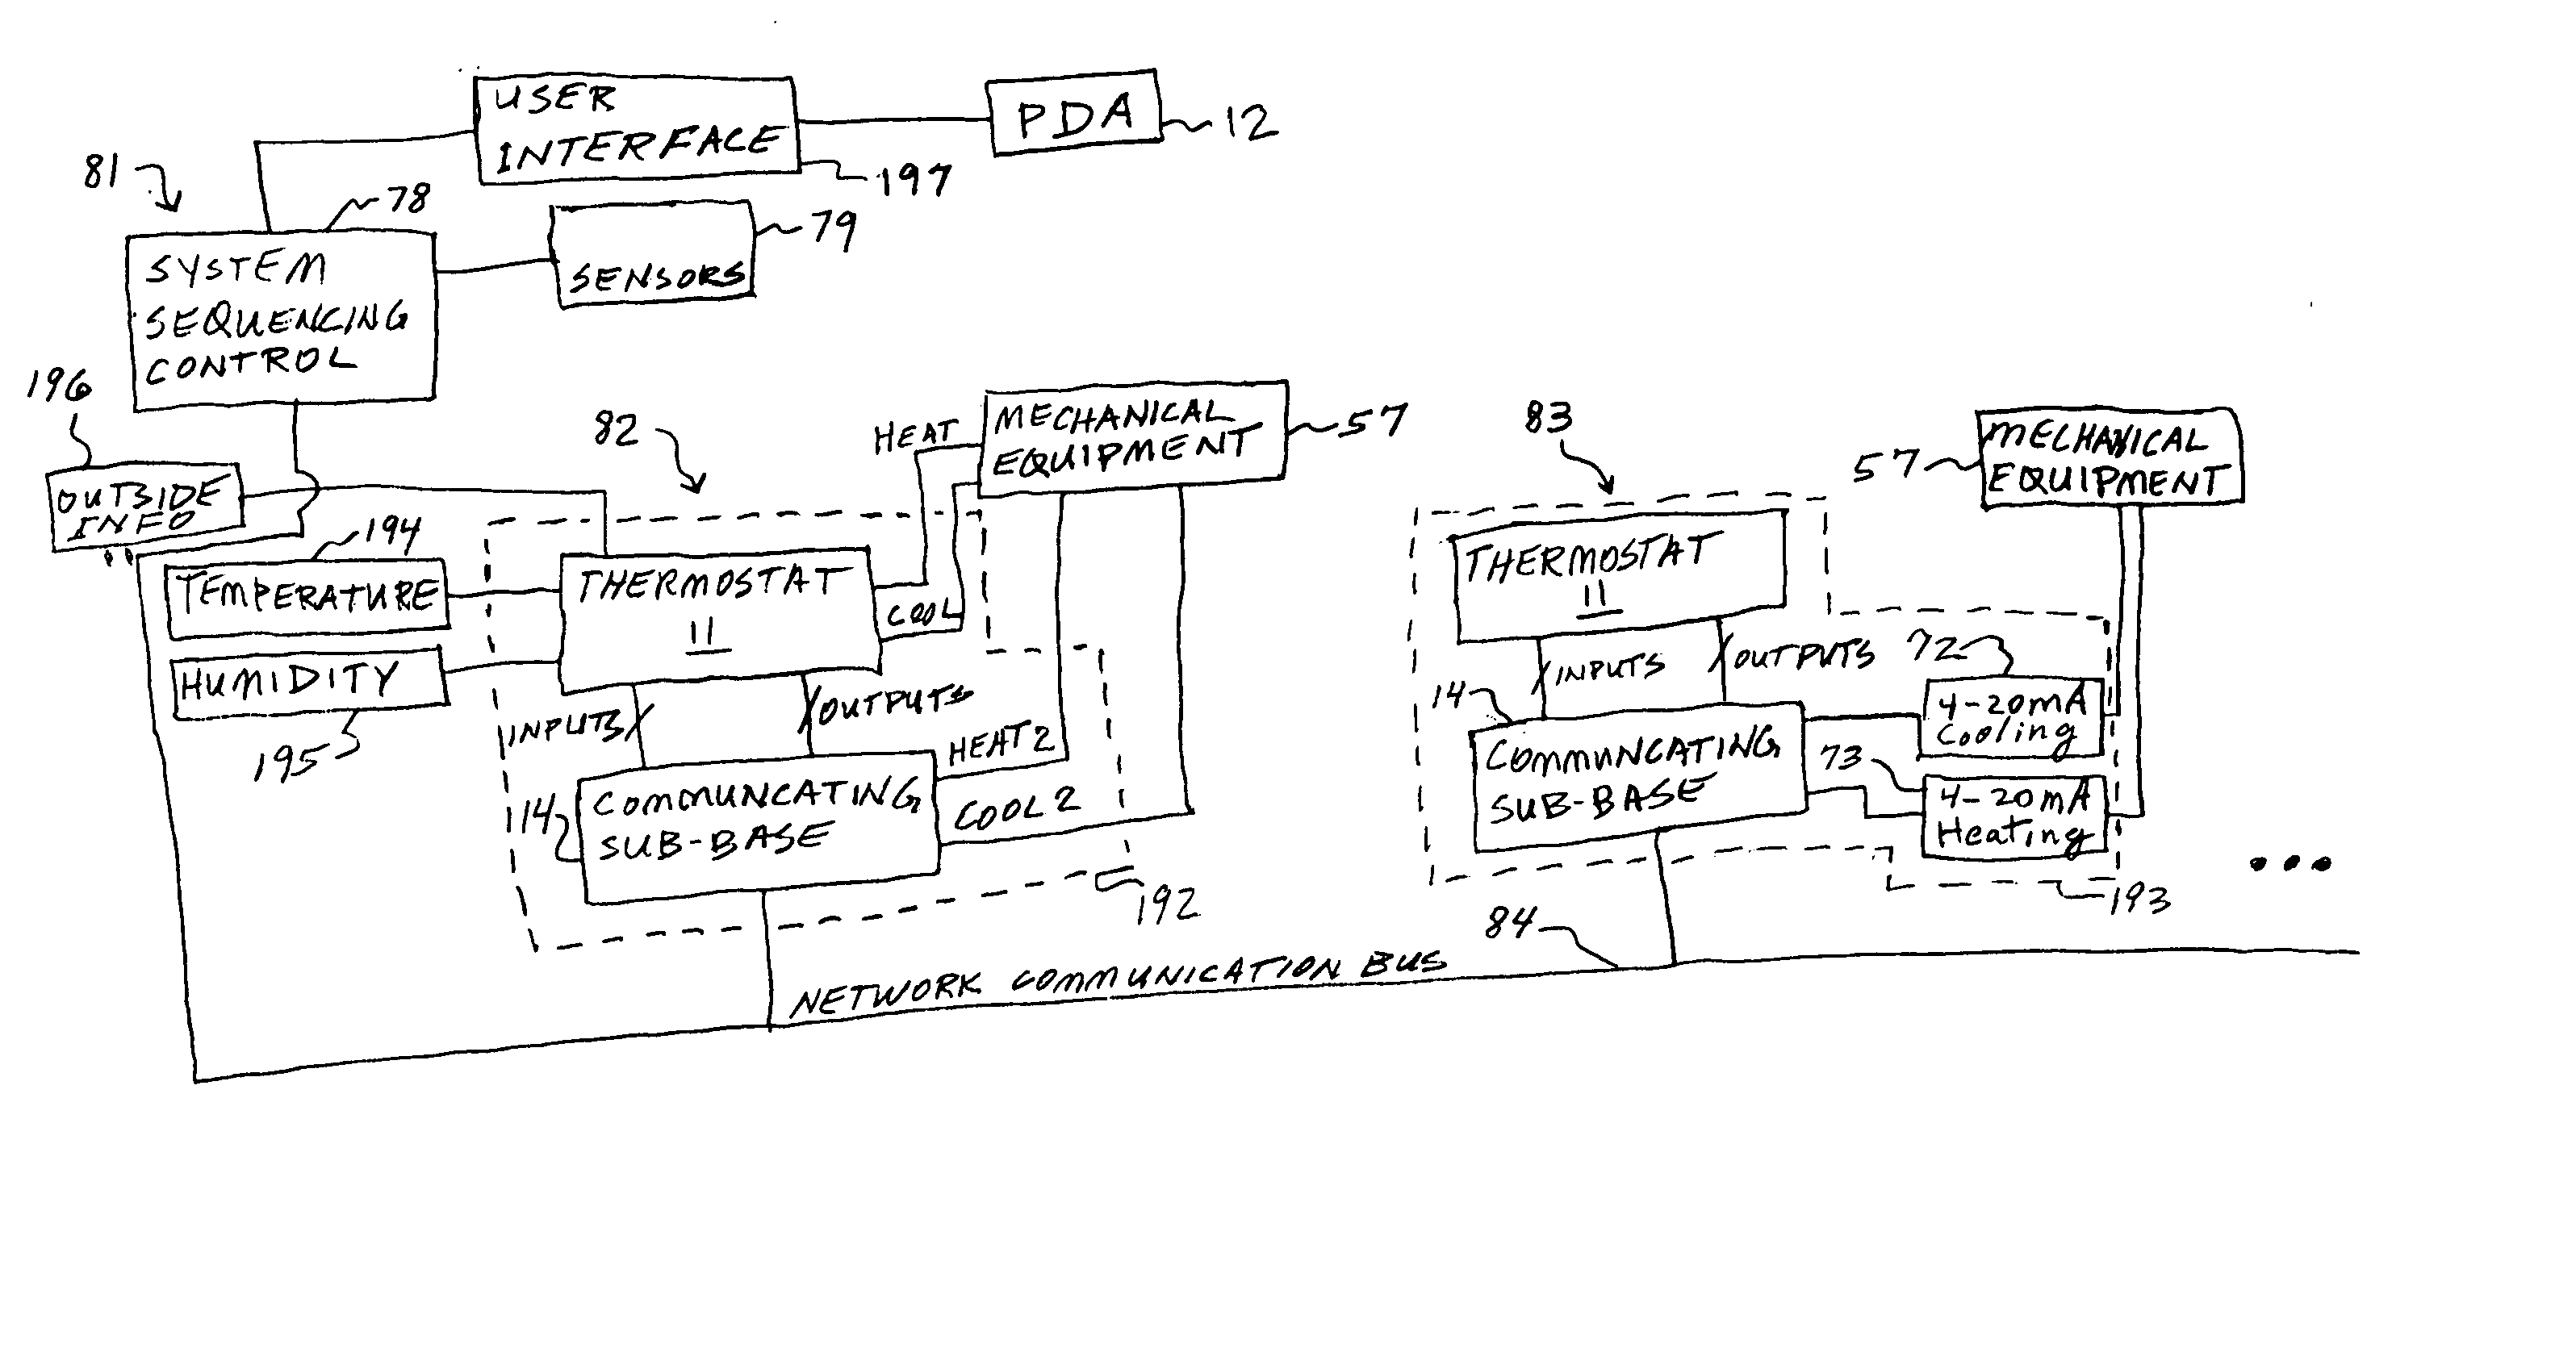 PDA configuration of thermostats